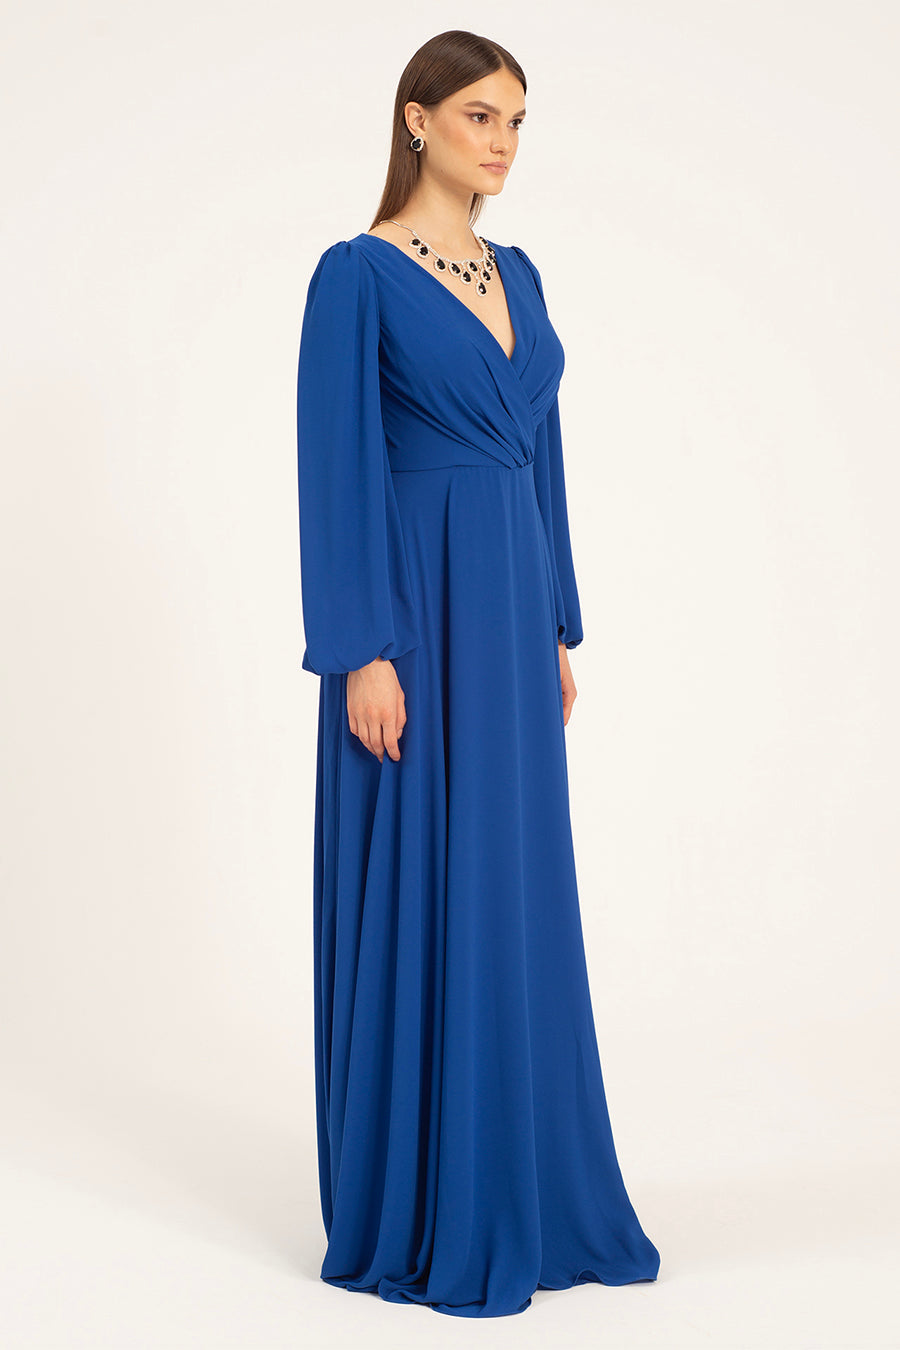 Lolanthe - Mystic Evenings | Evening and Prom Dresses